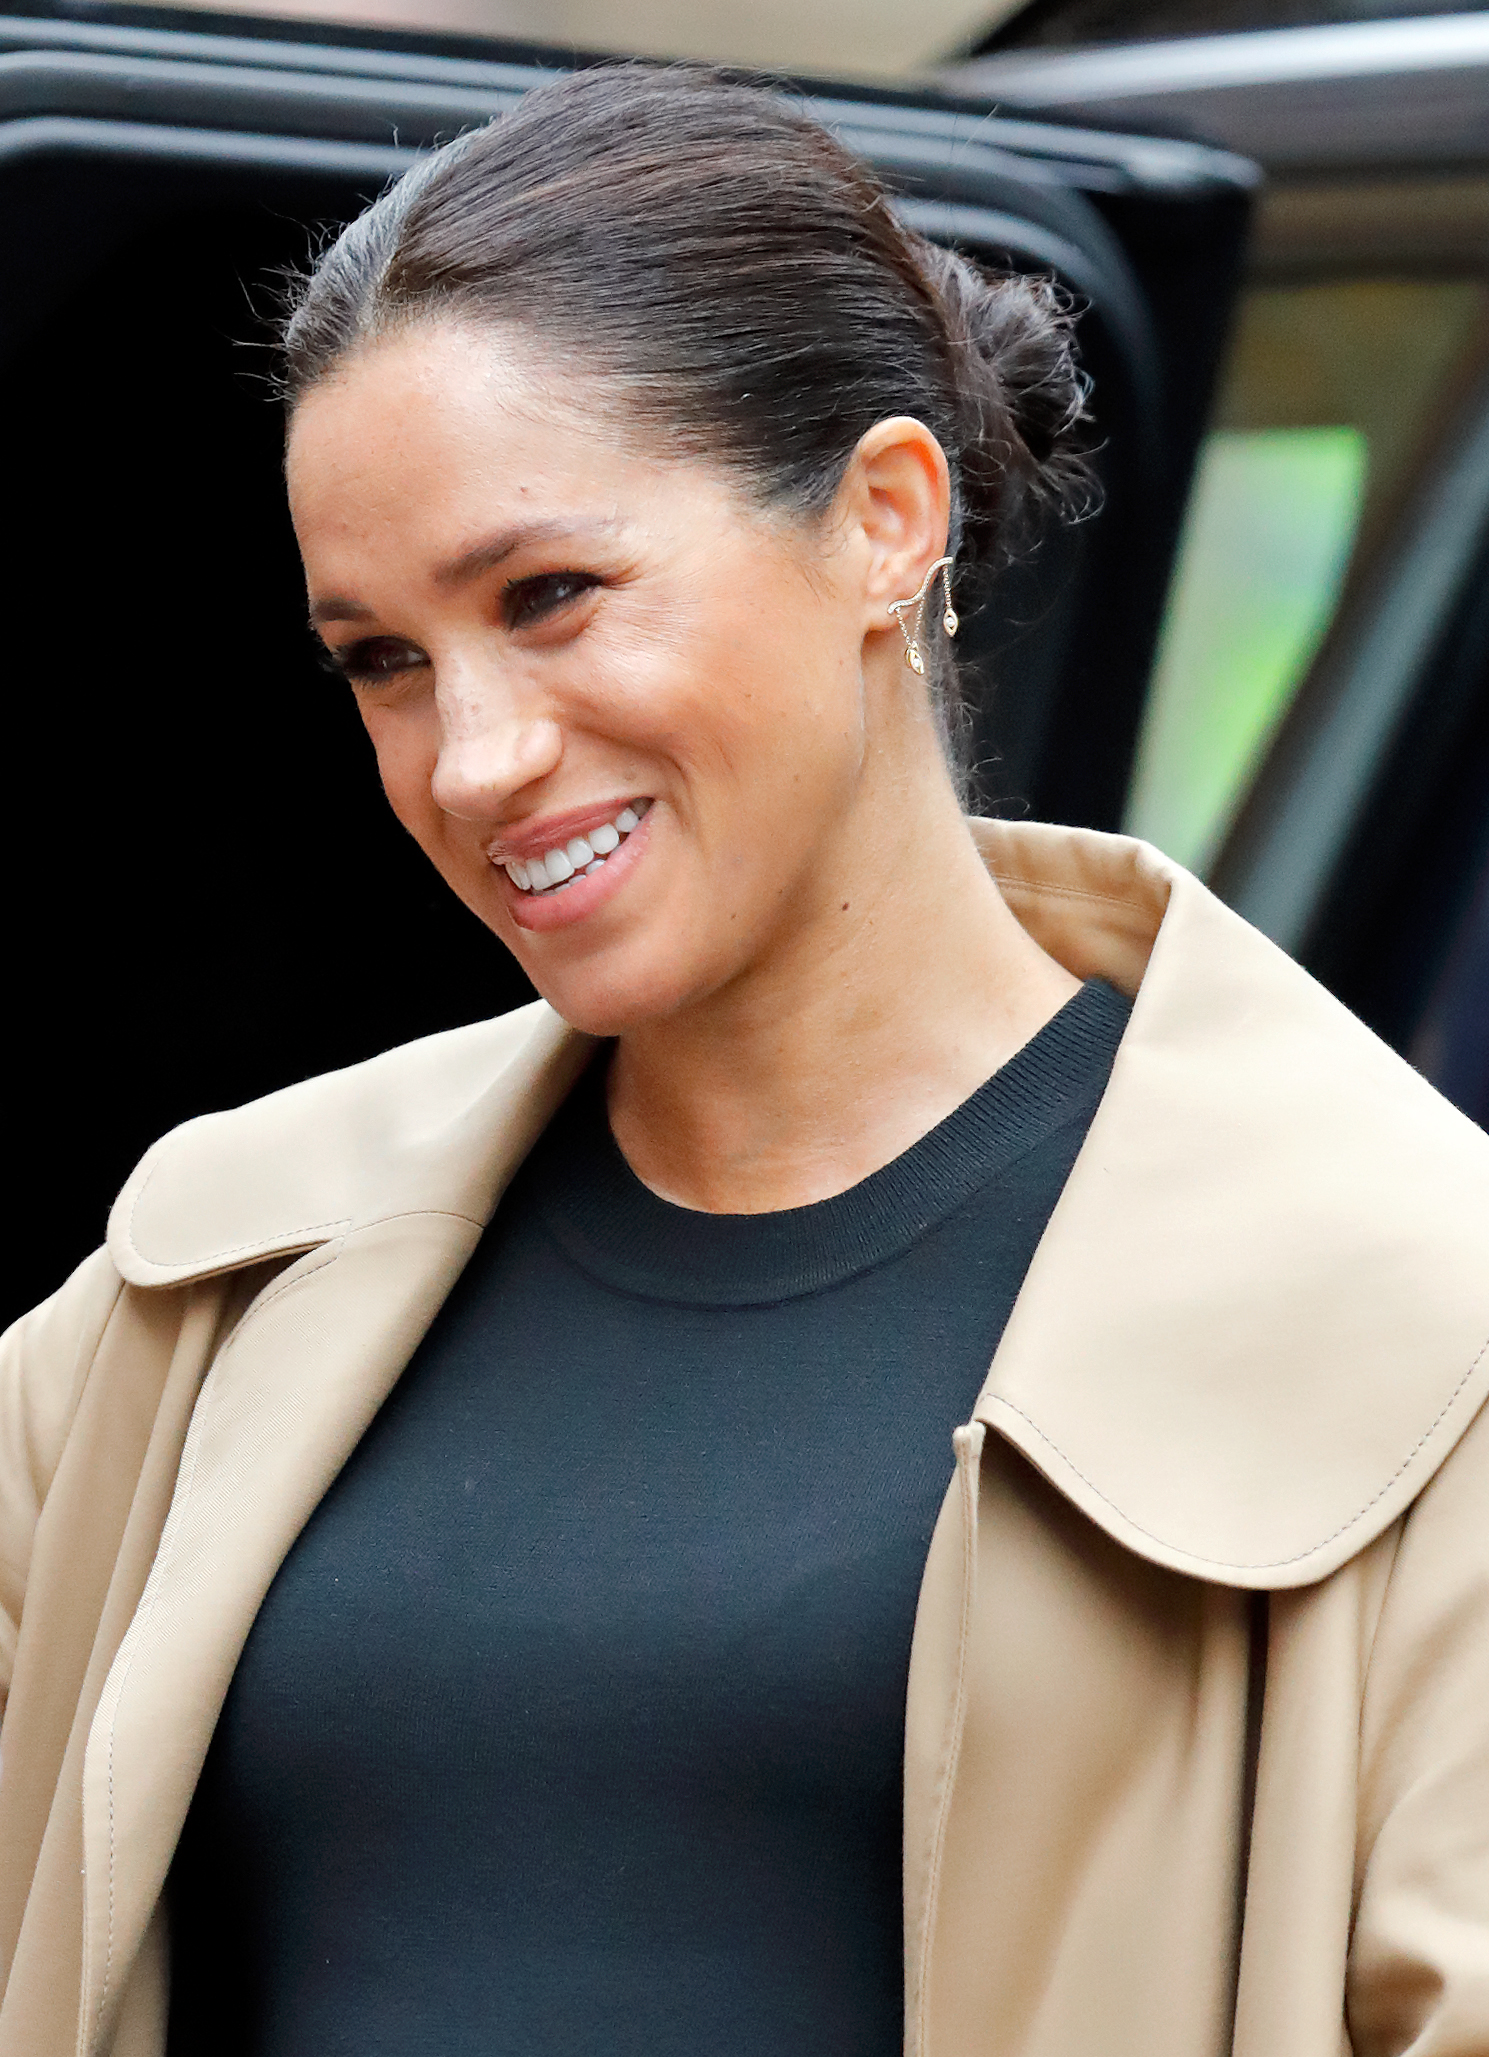 Meghan Markle visits Smart Works on January 10, 2019 in London, England. | Source: Getty Images